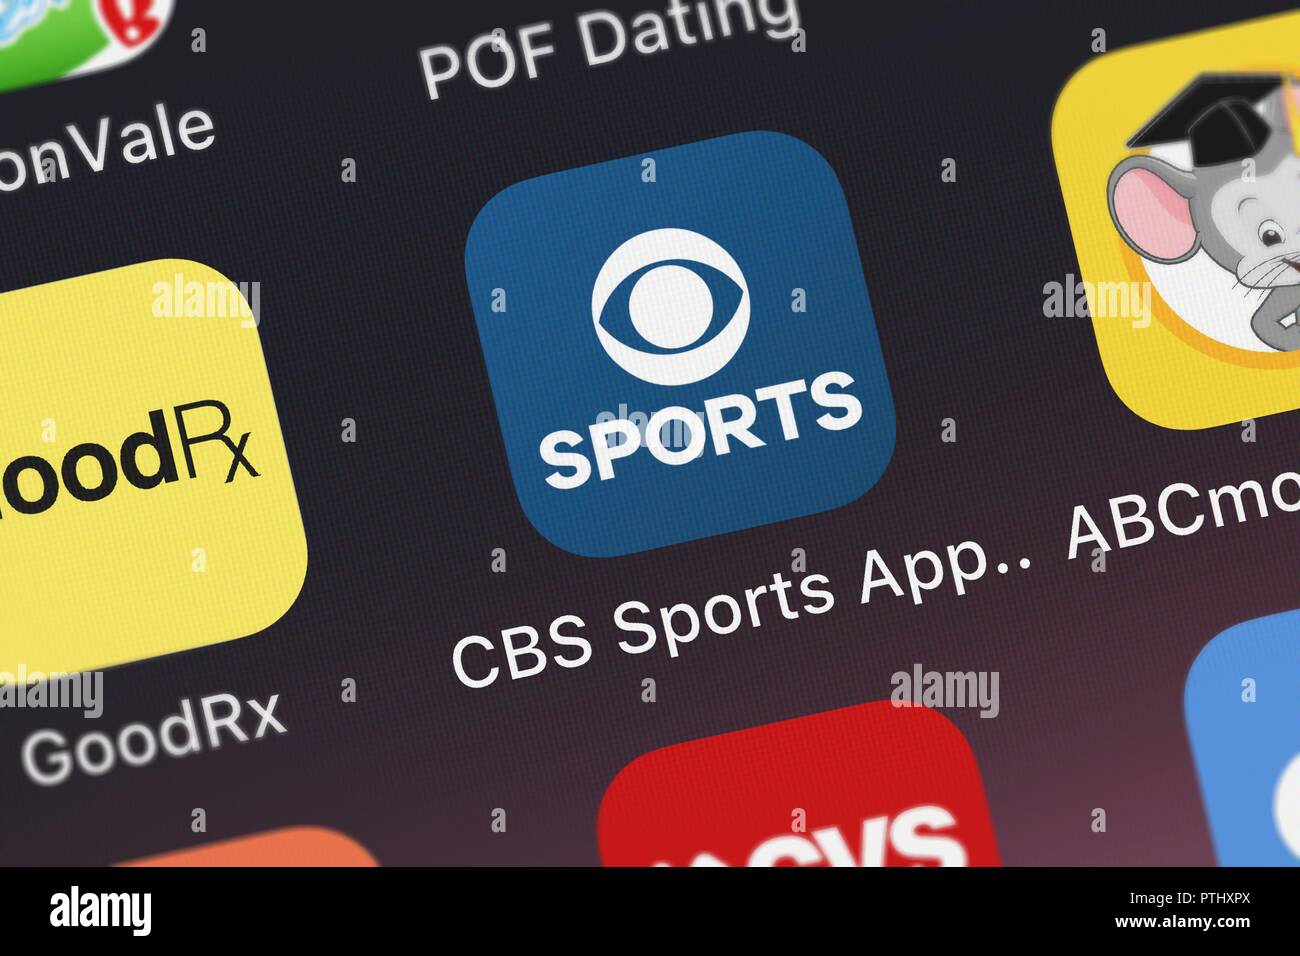 London, United Kingdom - October 09, 2018 The CBS Sports App Scores Stats mobile app from CBS Interactive on an iPhone screen Stock Photo